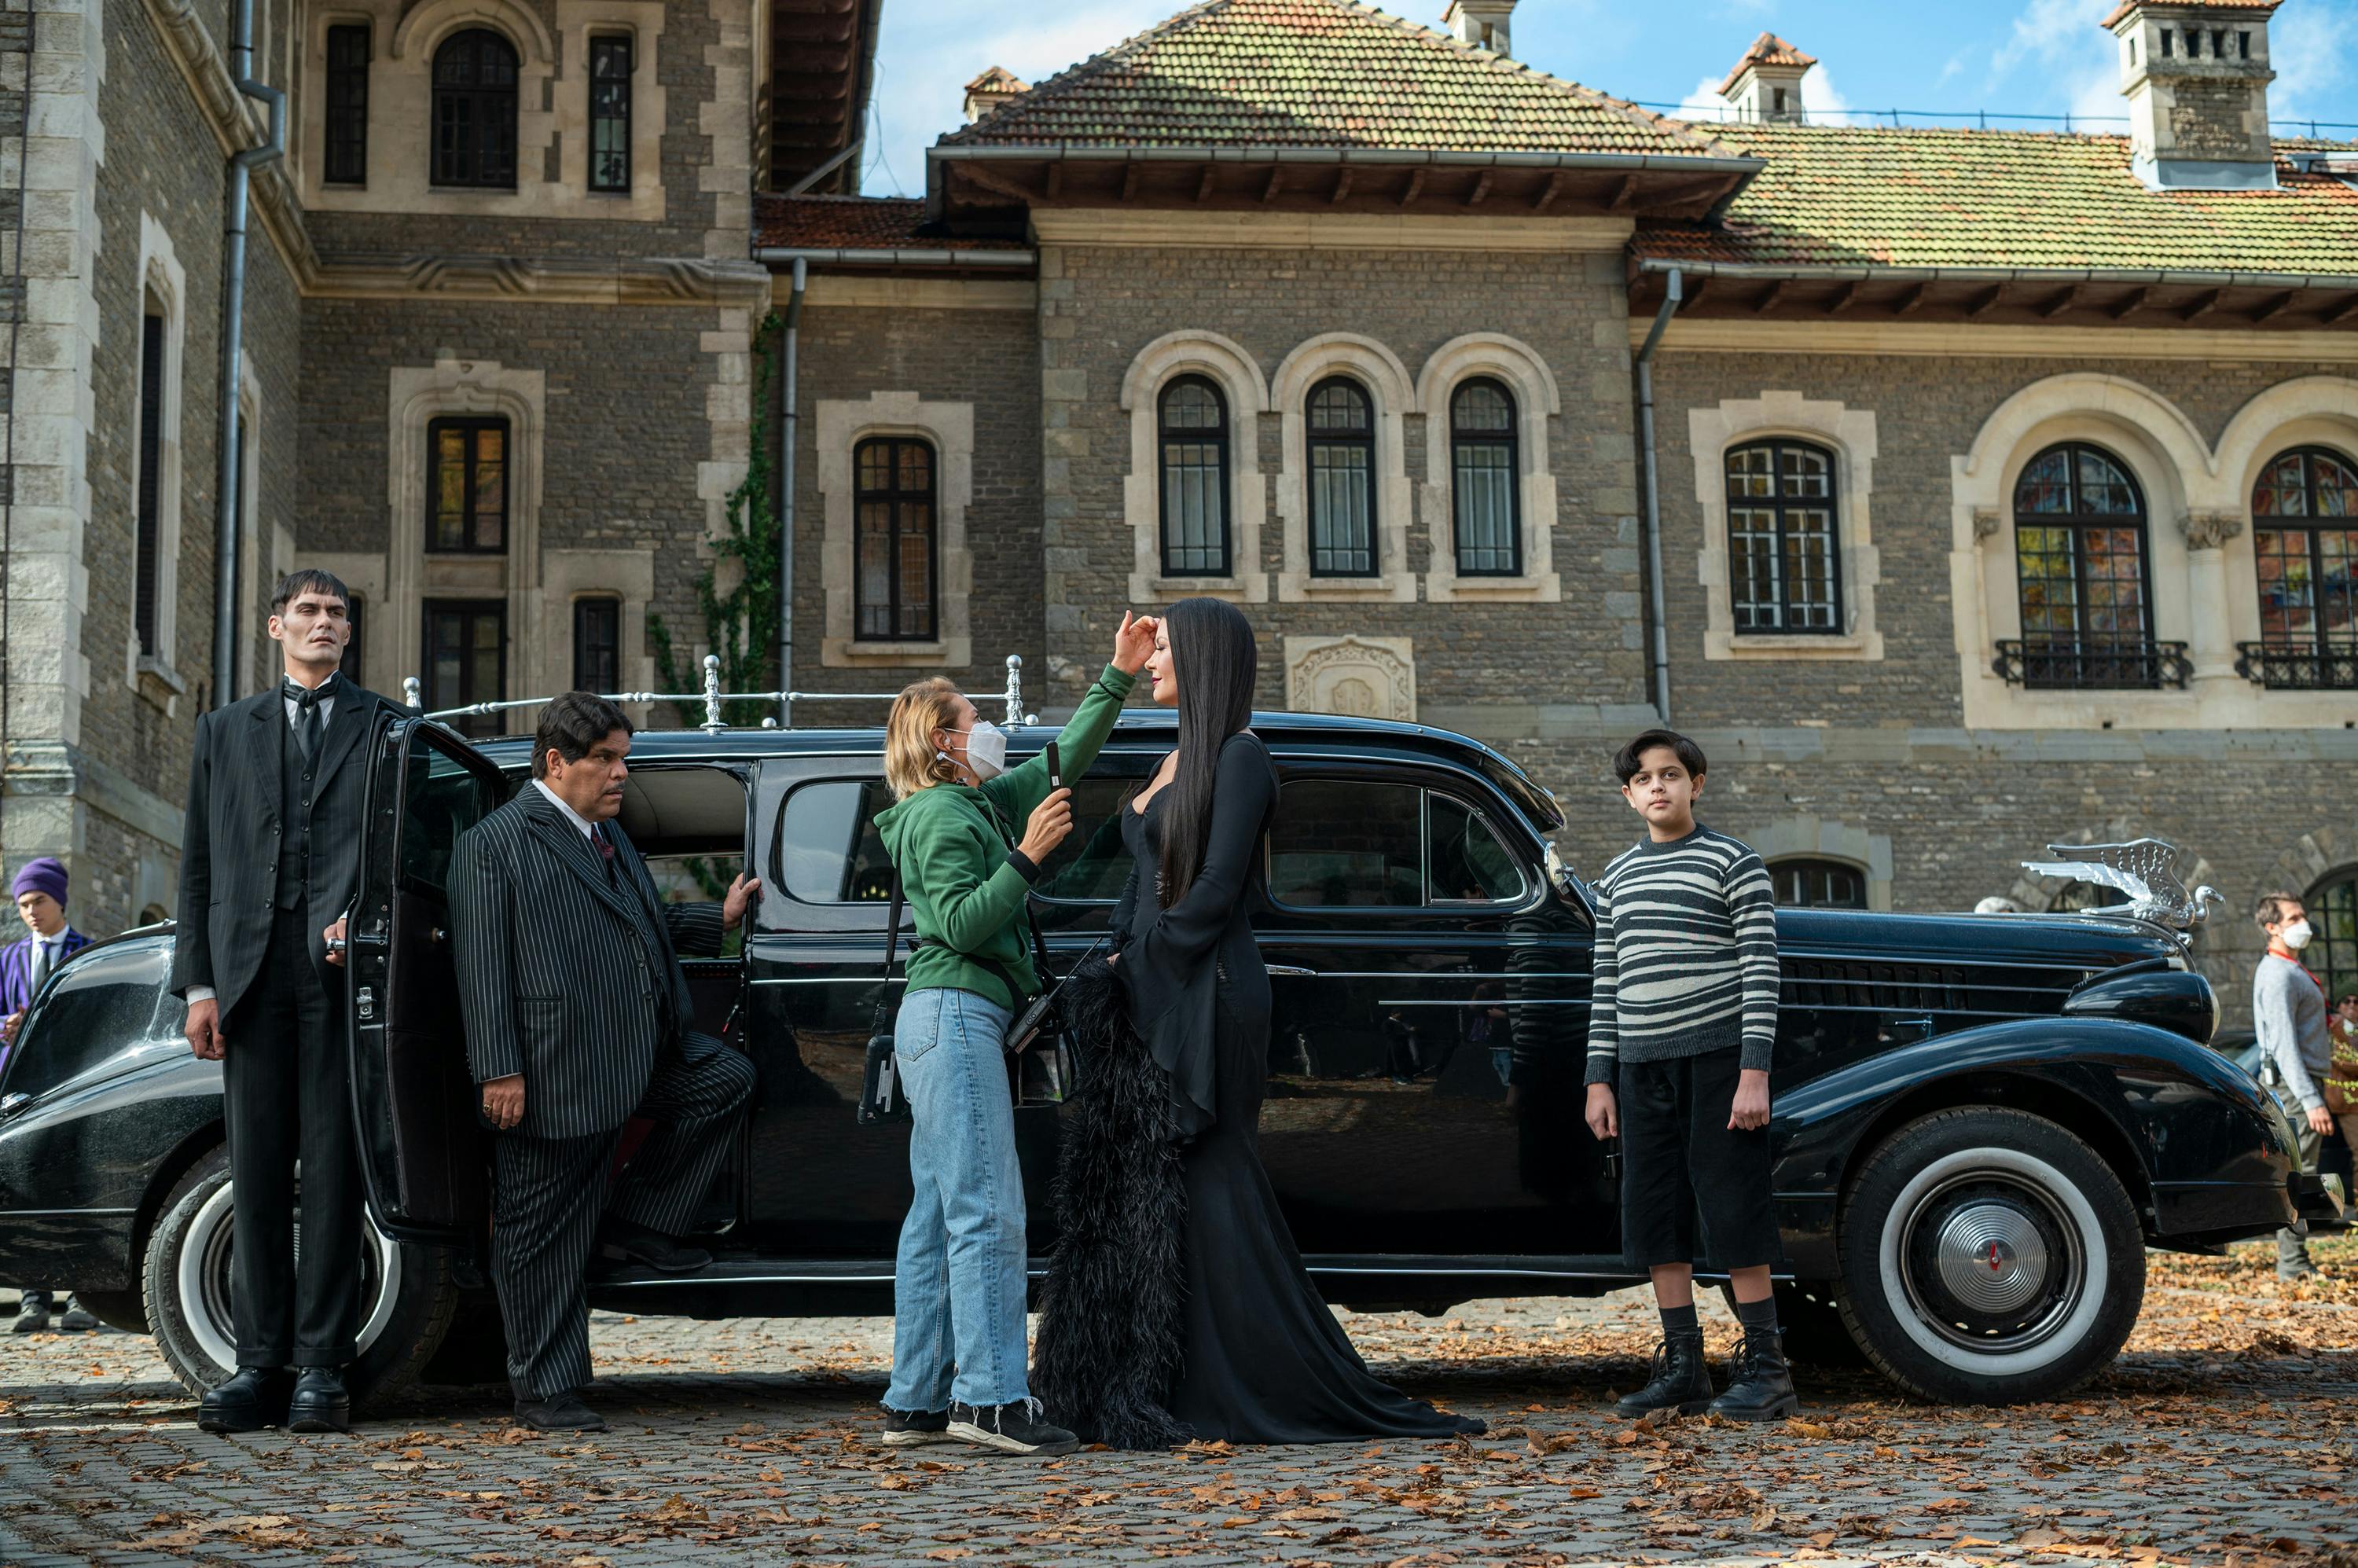 Lurch (George Burcea), Gomez Addams (Luis Guzmán), Morticia Addams (Catherine Zeta-Jones), and Pugsley Addams (Issac Ordonez) stand outside a limo at Nevermore Academy.  